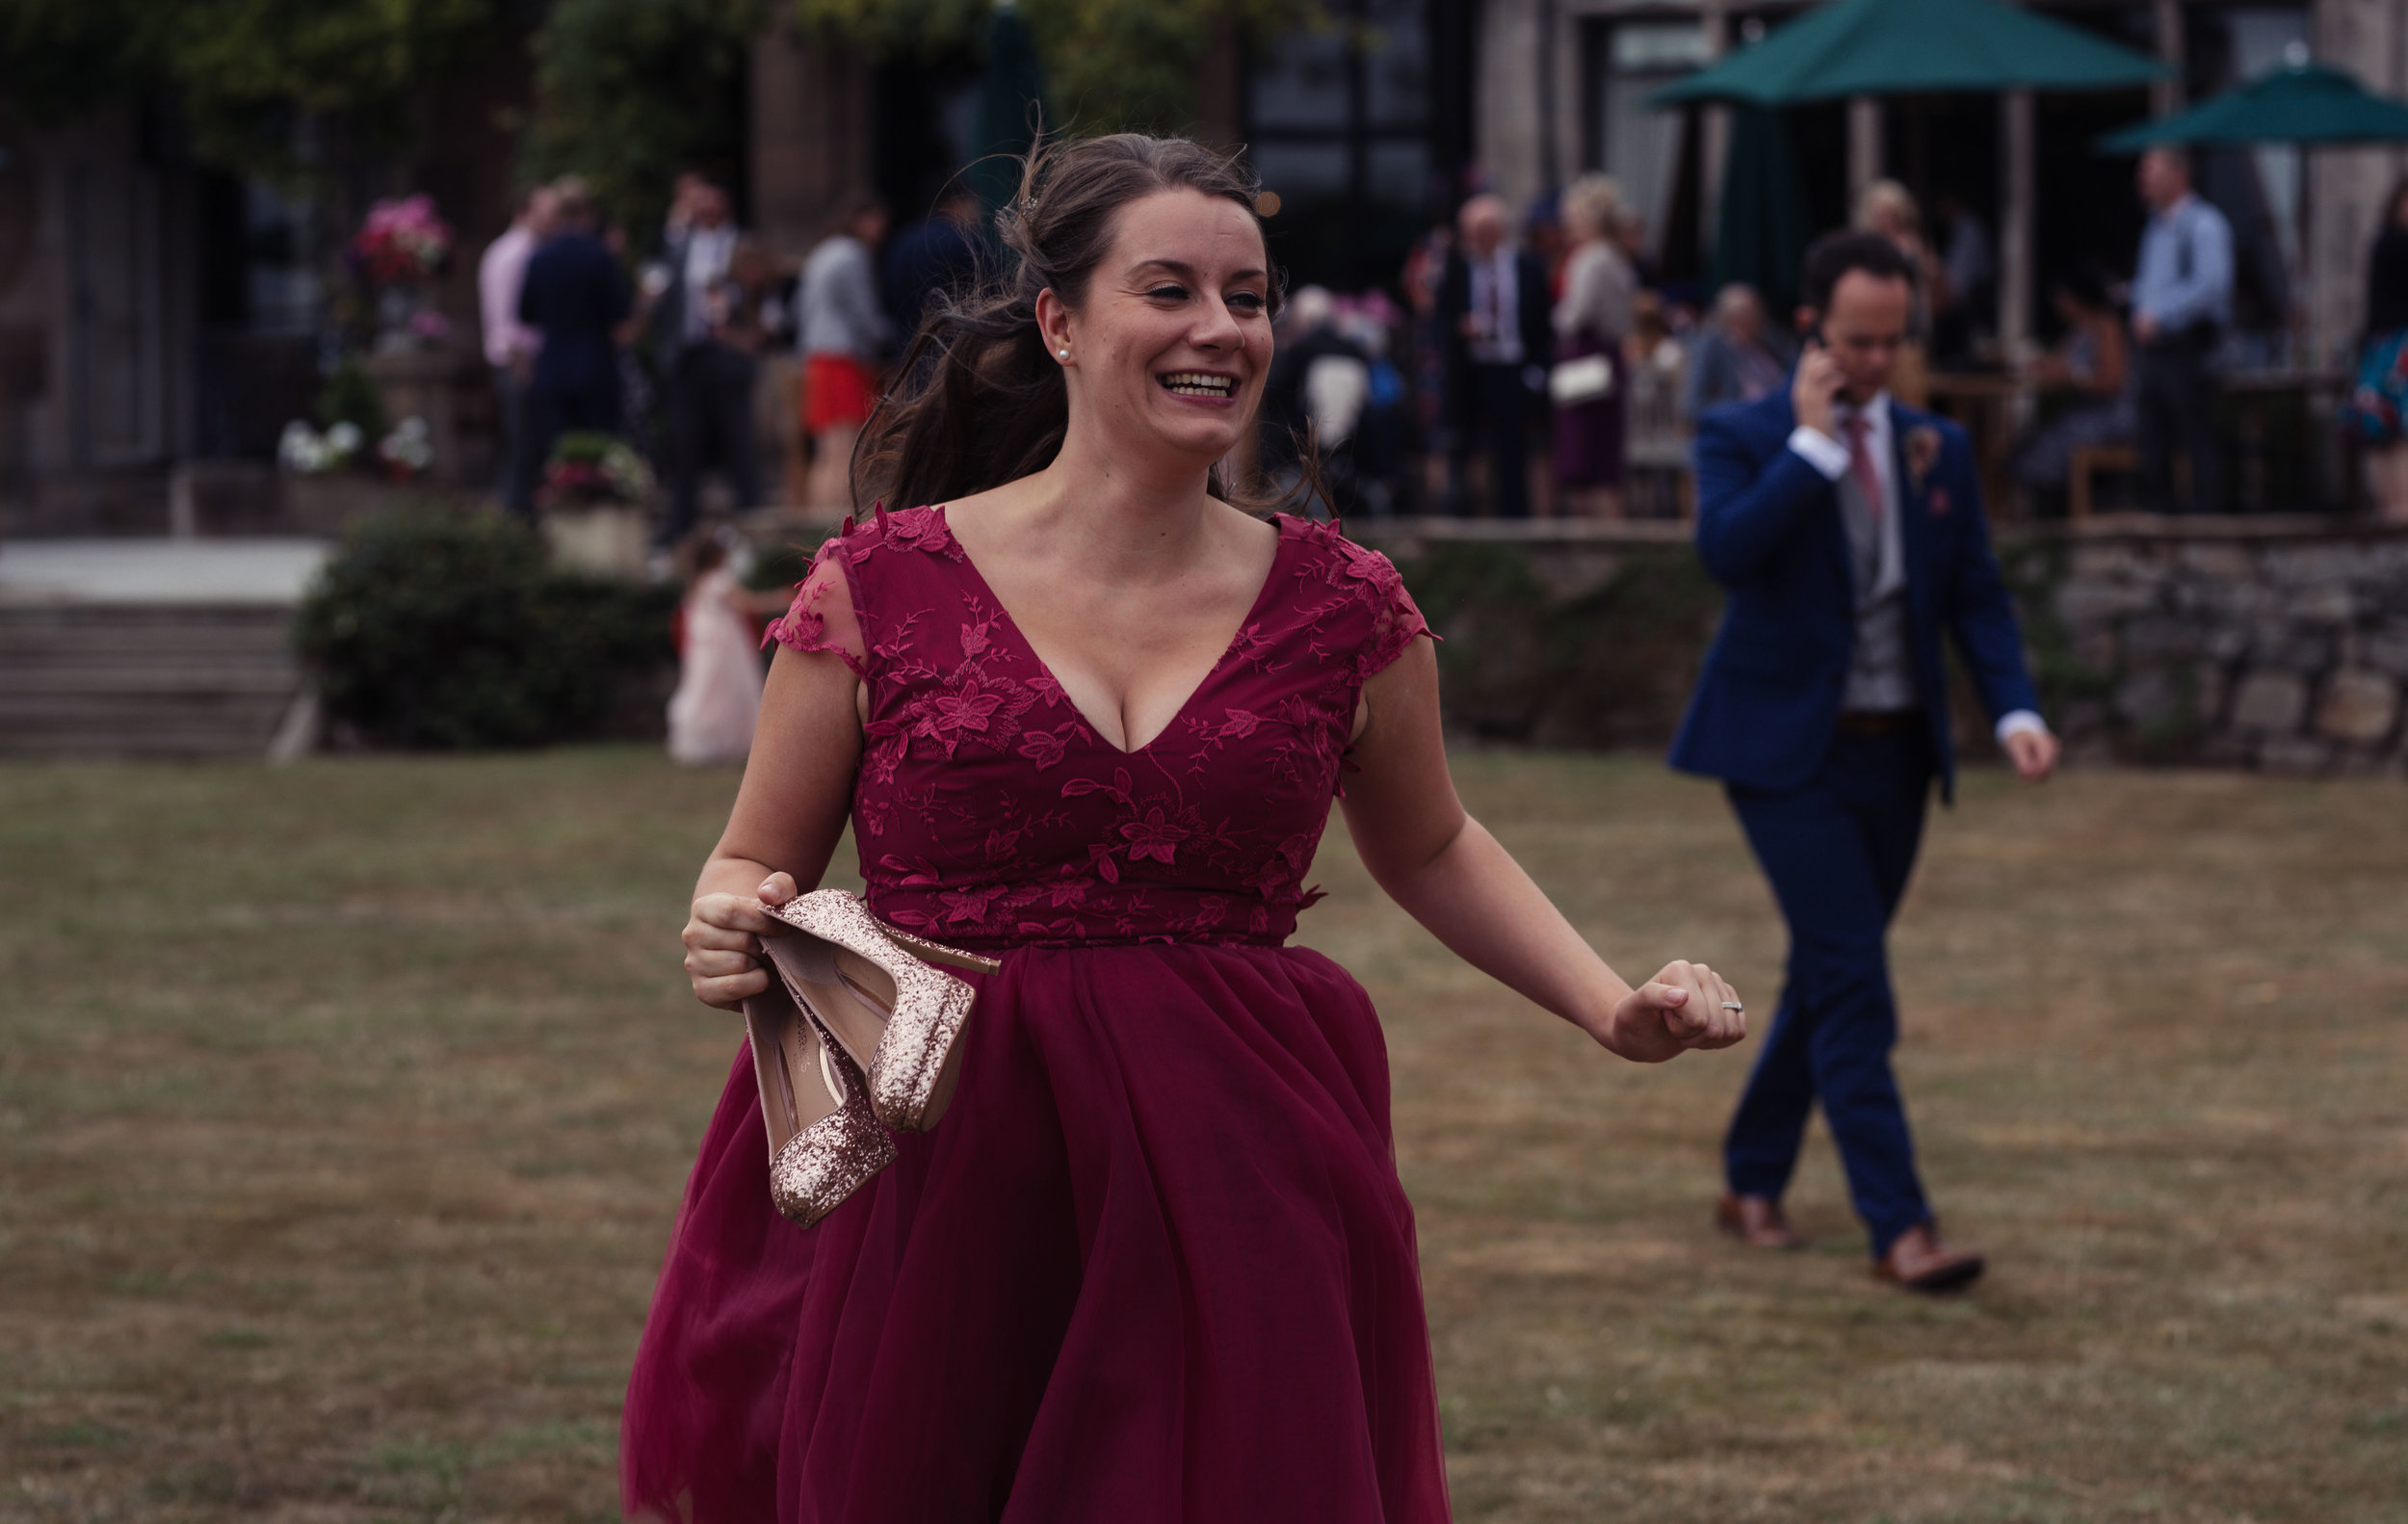 The bridesmaid runs towards the other bridesmaids with her shoes off